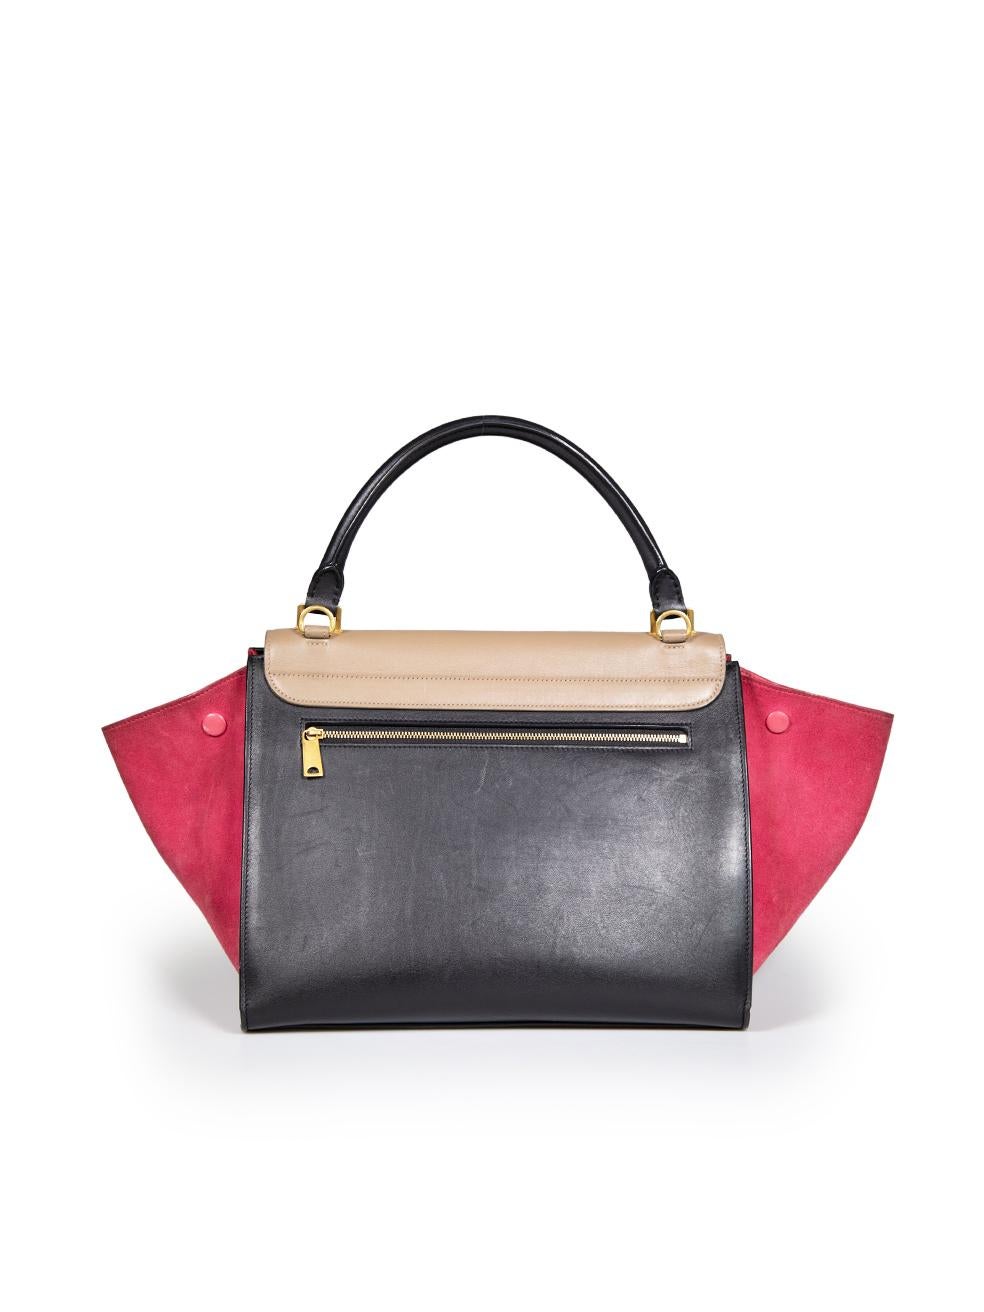 Céline Tricolour Leather Medium Trapeze Bag In Good Condition For Sale In London, GB